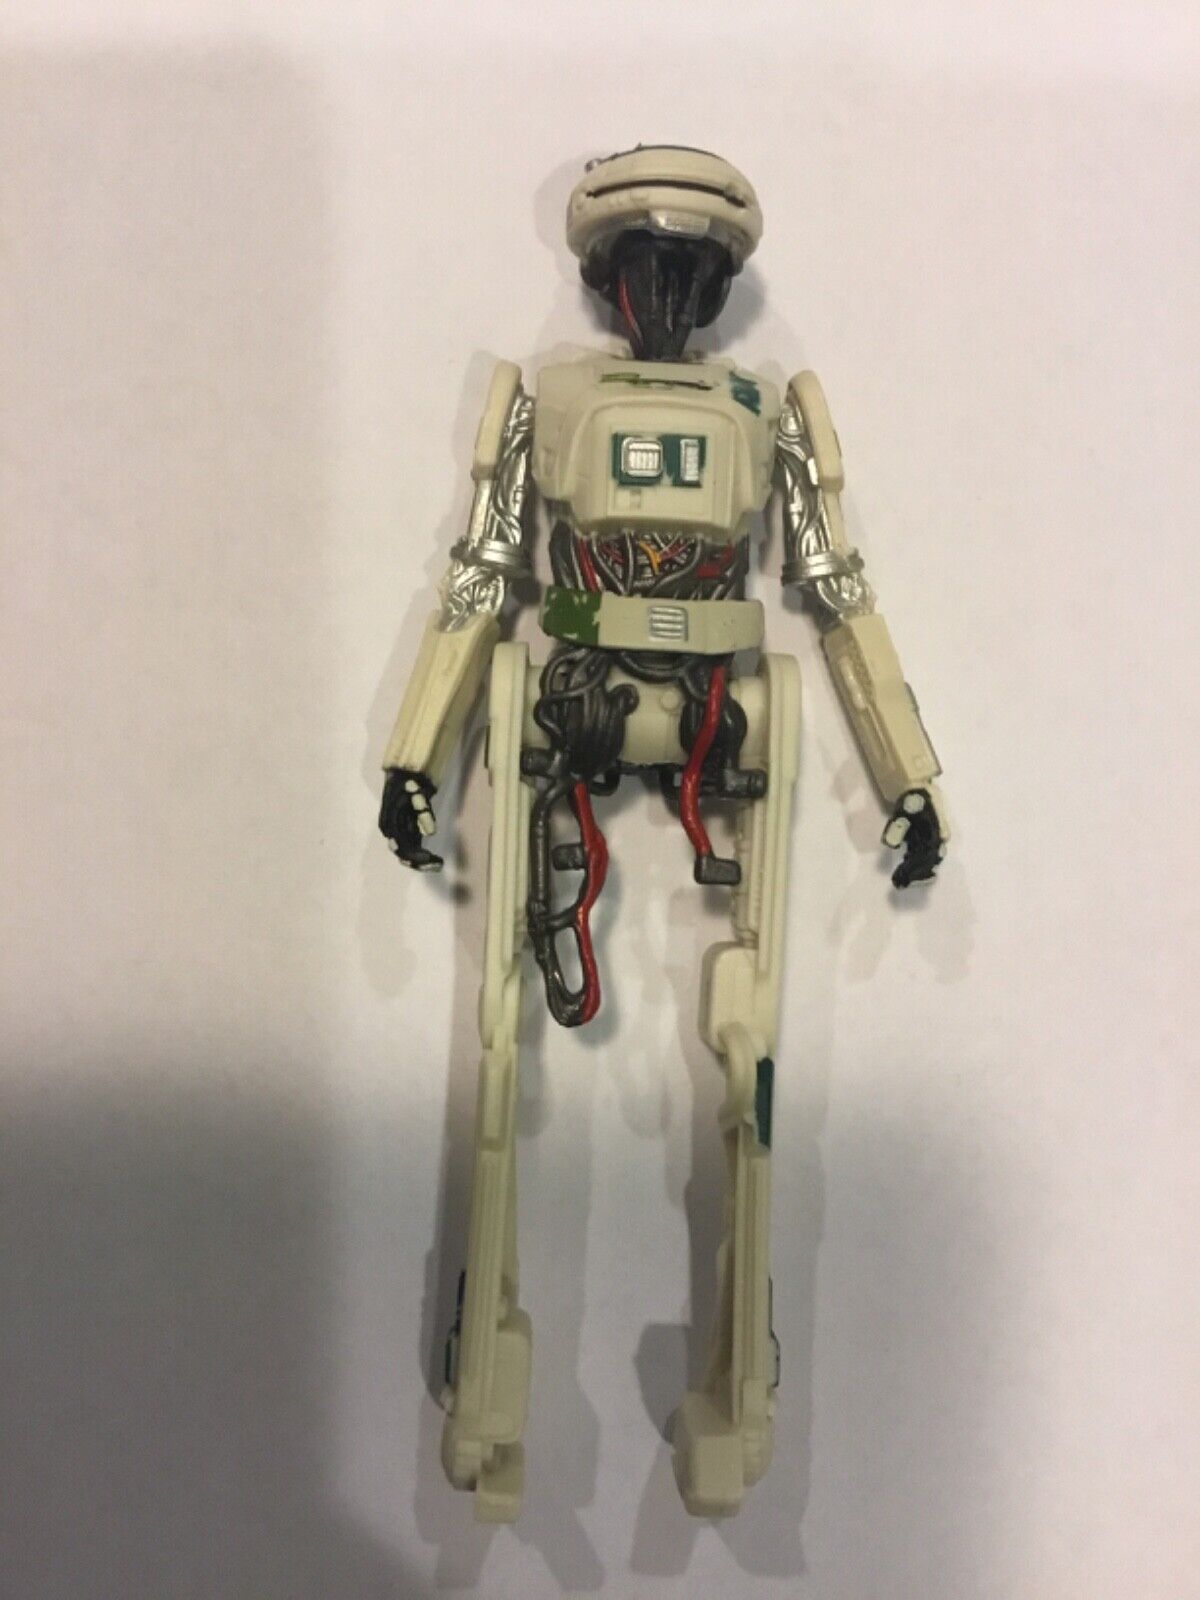 Solo A Star Wars Story Force Link 2.0 L3-37 Complete 3.75" Action Figure - loose